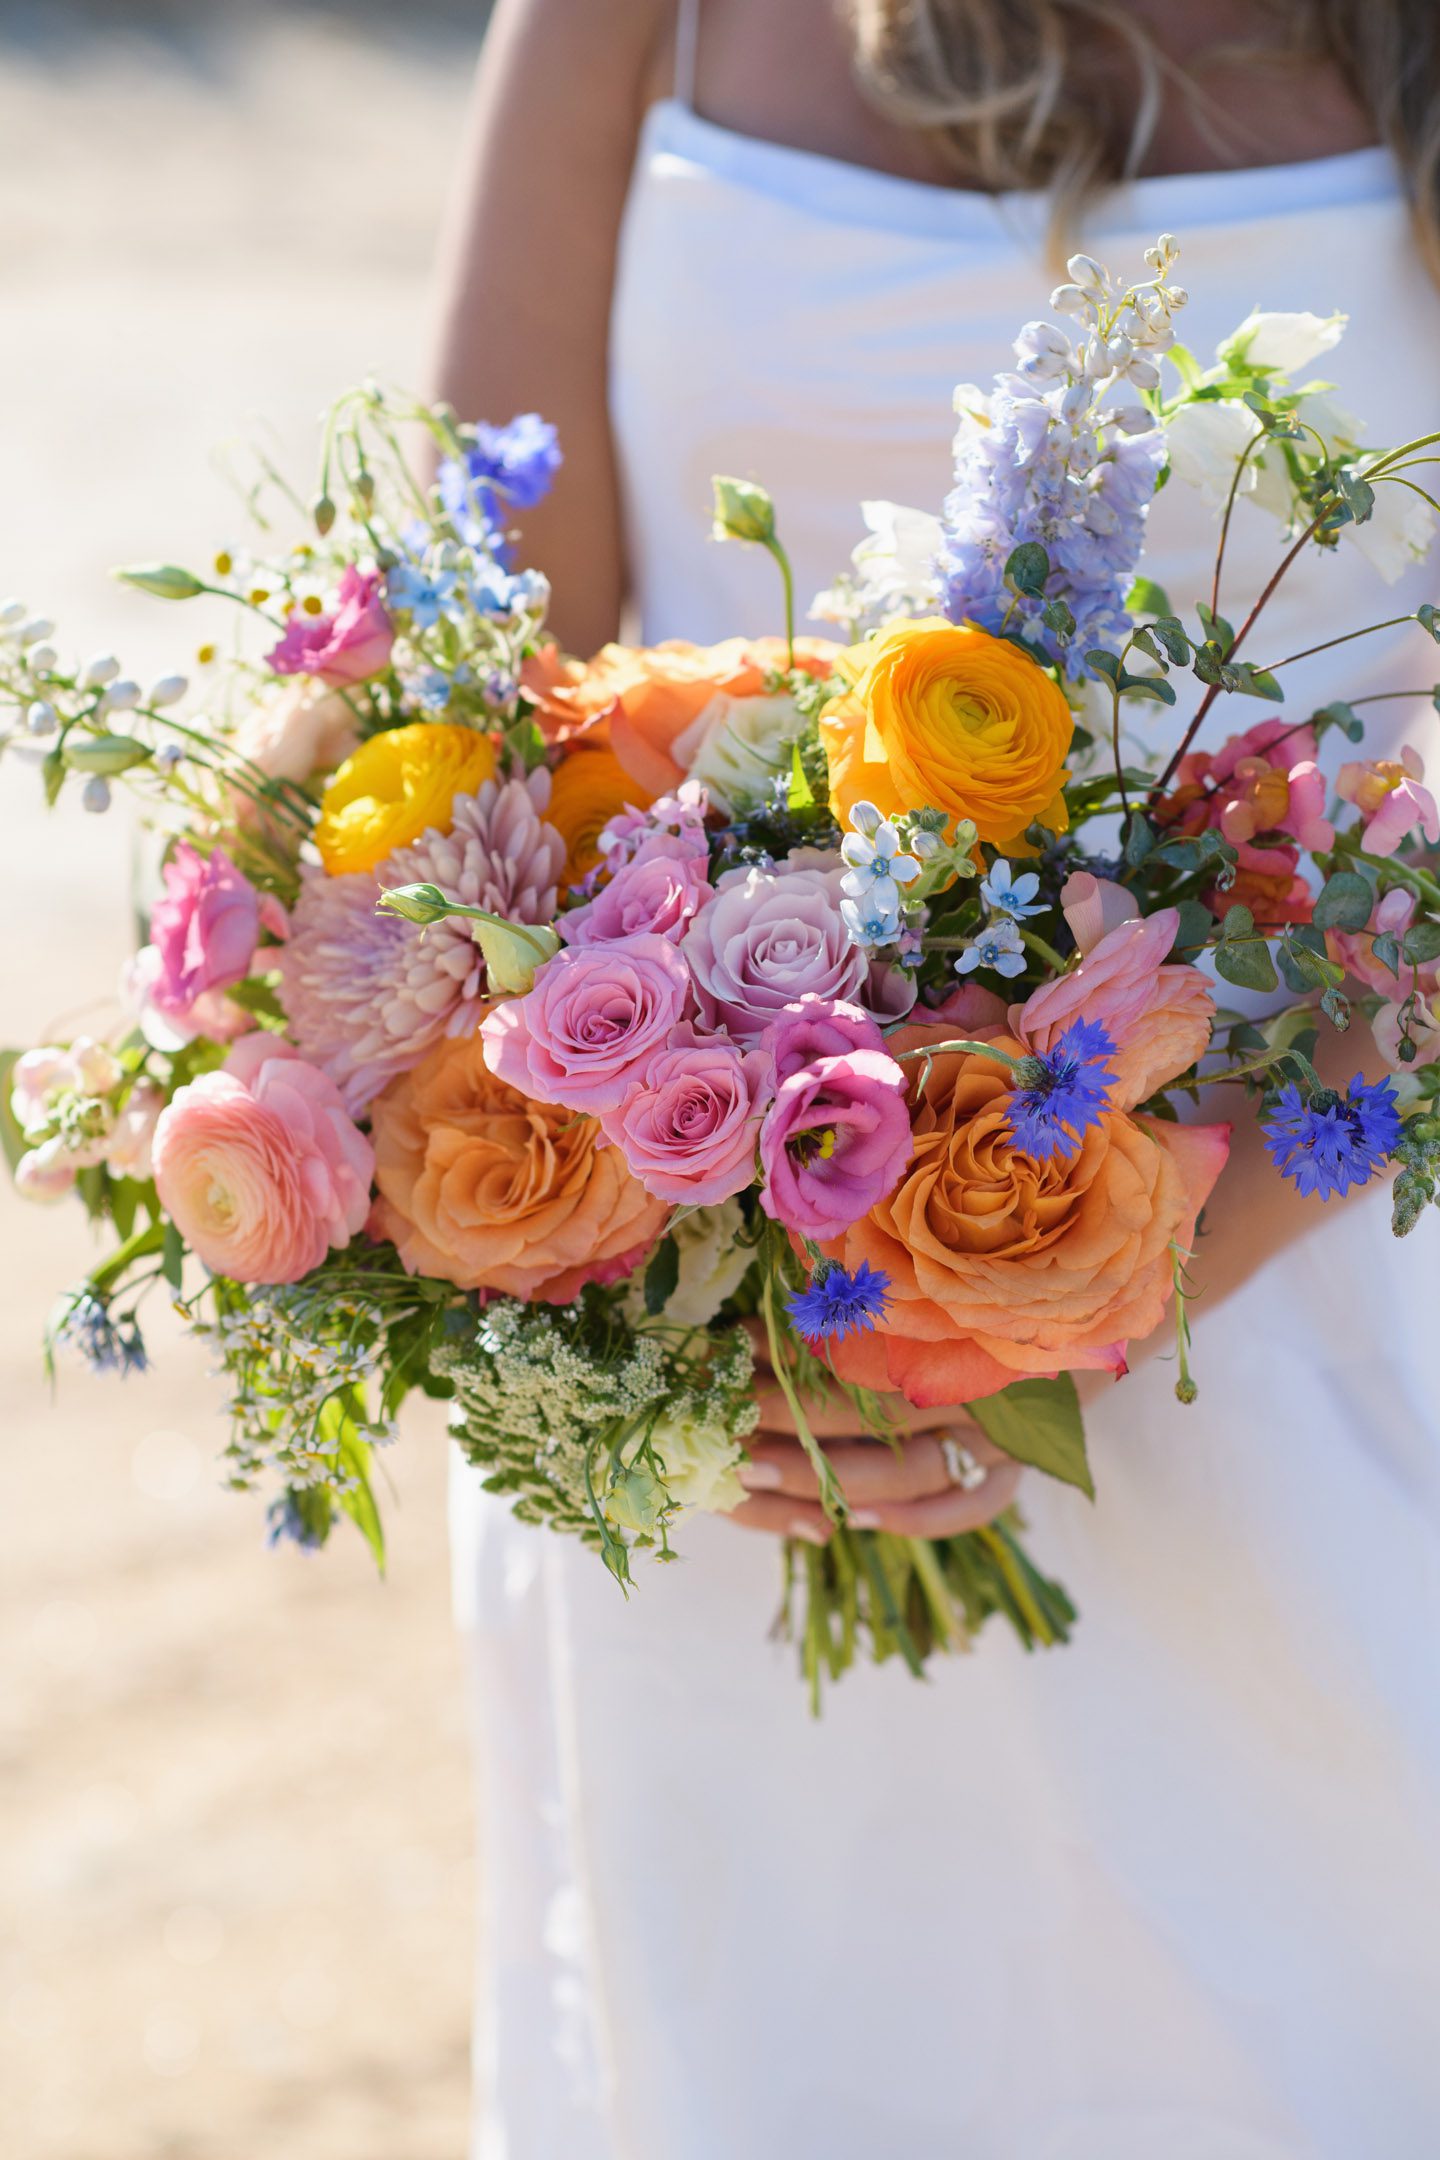 Colorful spring wedding bouquet by Flower Girls OBX